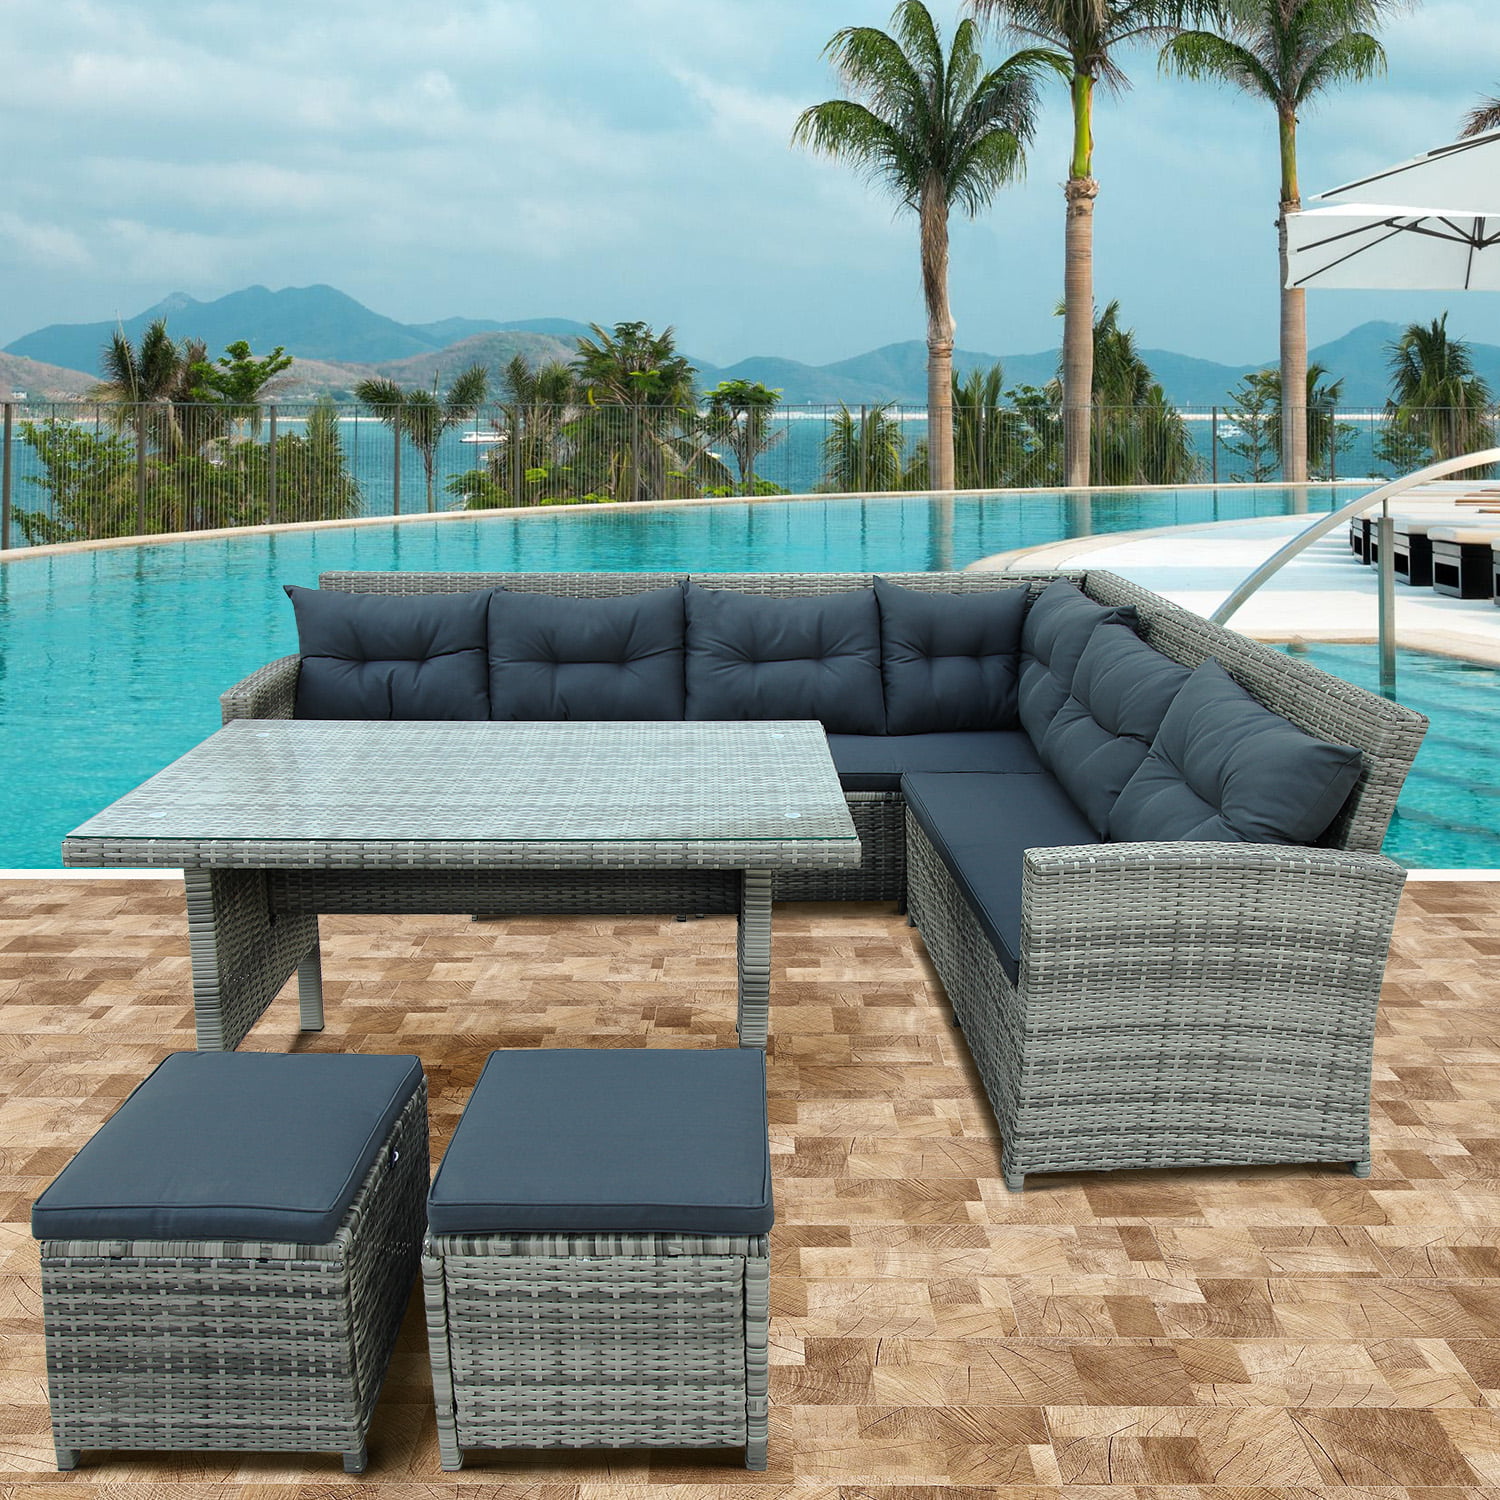 Patio Conversation Sets Clearance, Wicker Outdoor Sectional Sofa Set, Patio Set with 3 Loveseats ...